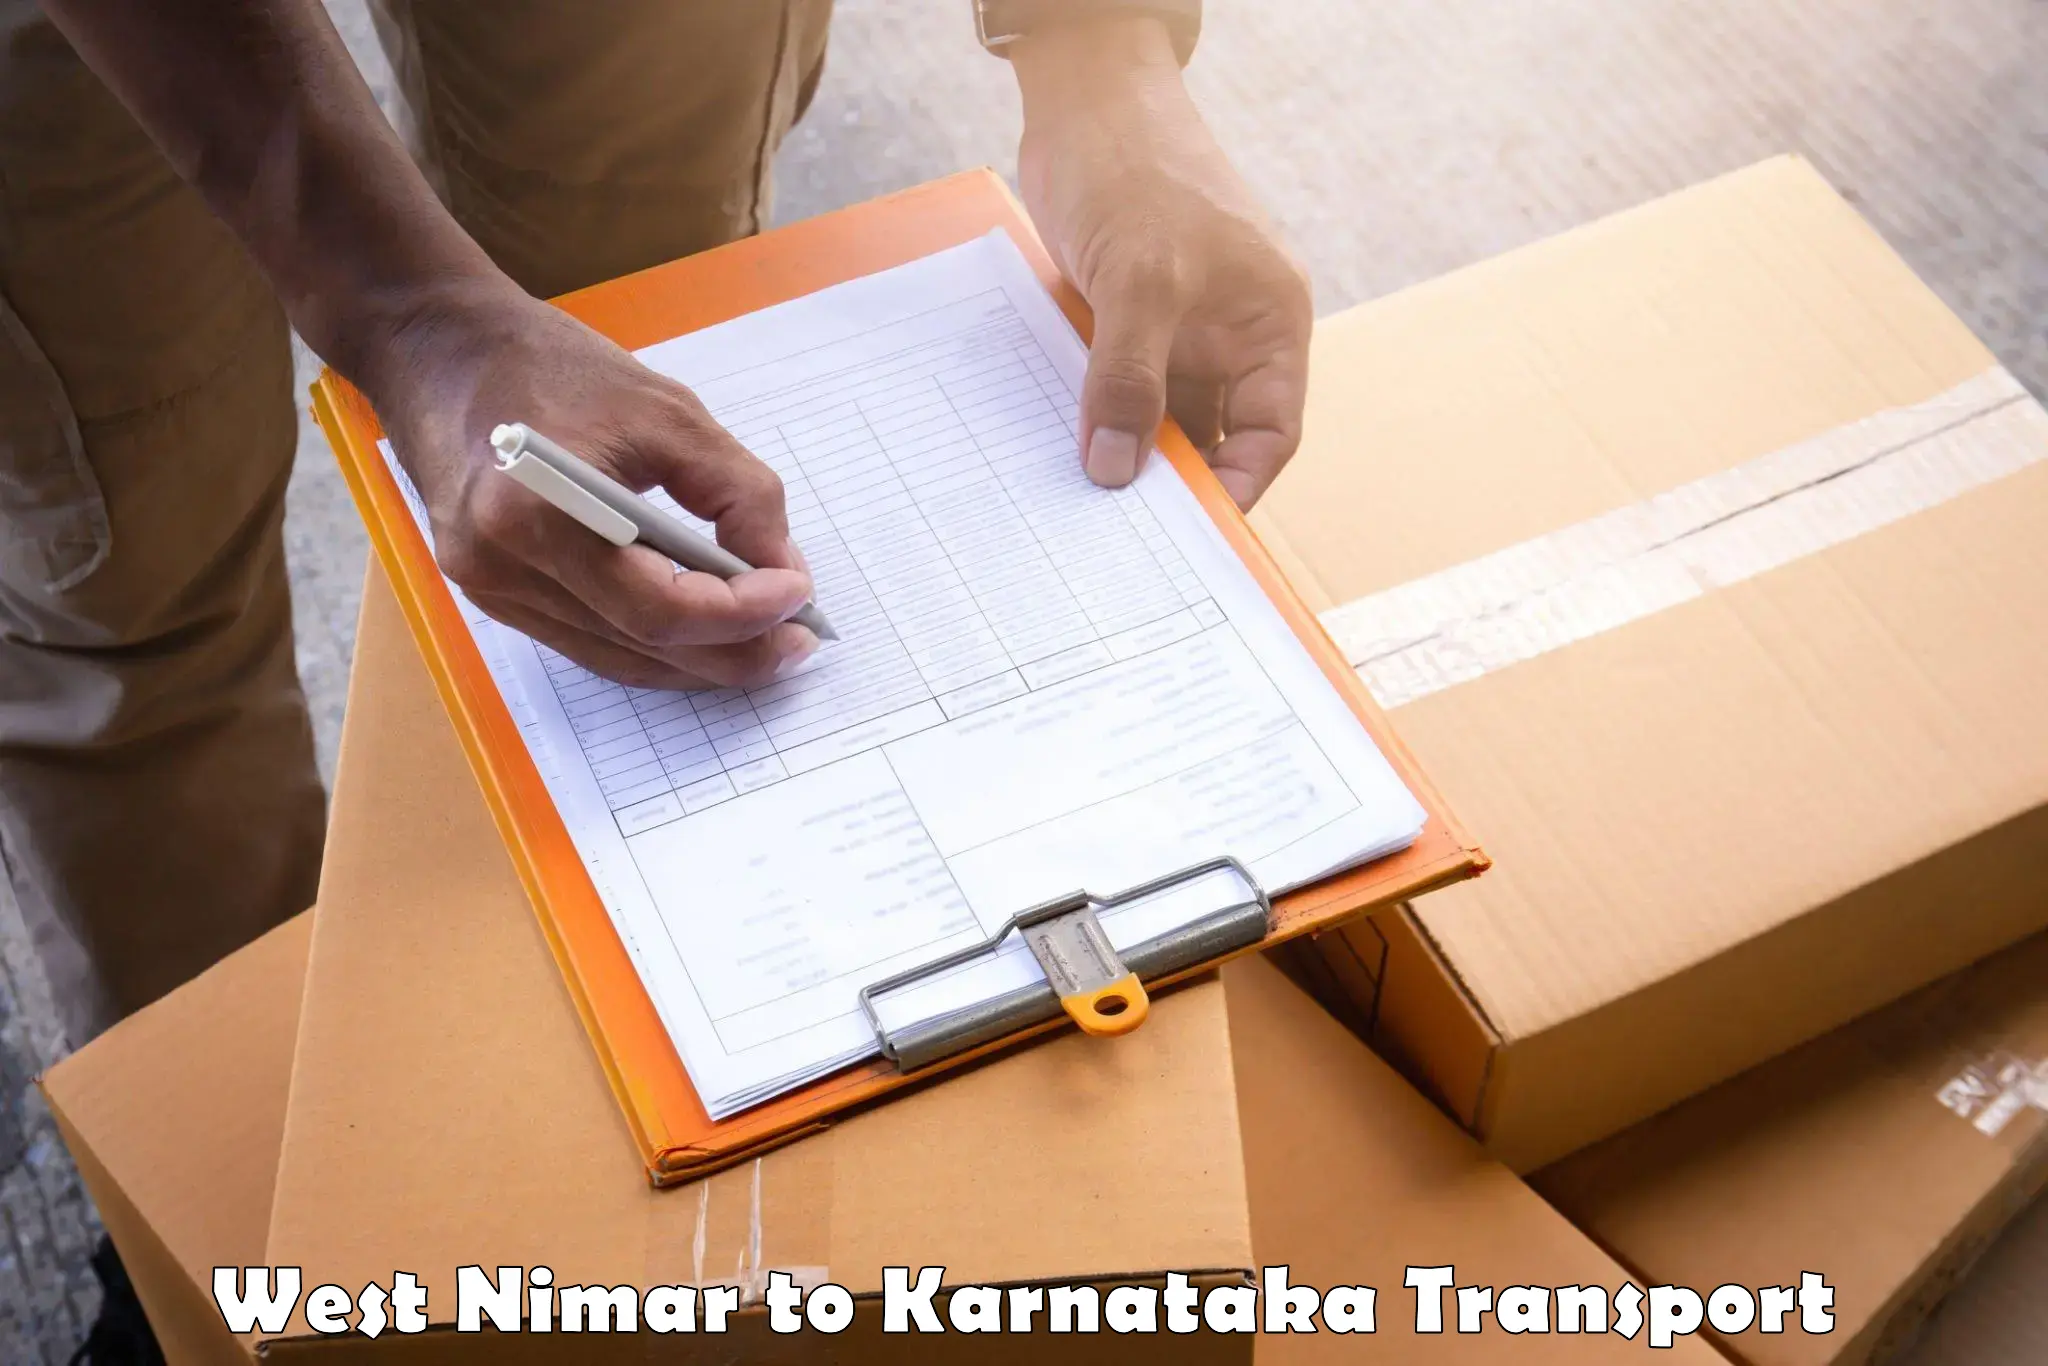 Air freight transport services West Nimar to Mulbagal